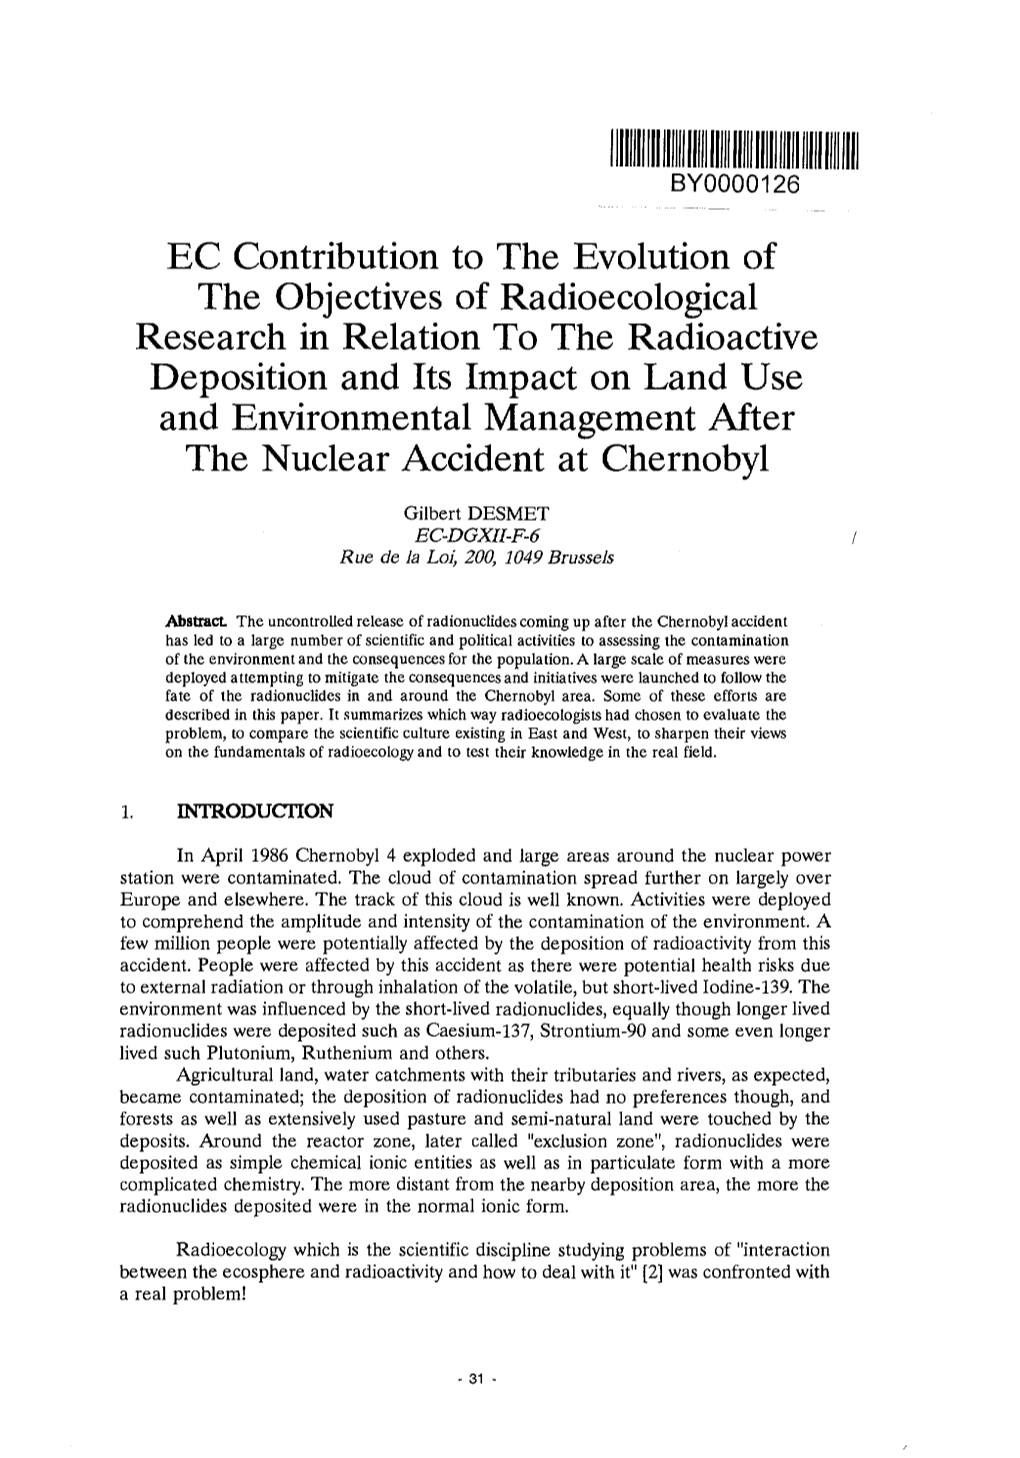 EC Contribution to the Evolution of the Objectives of Radioecological